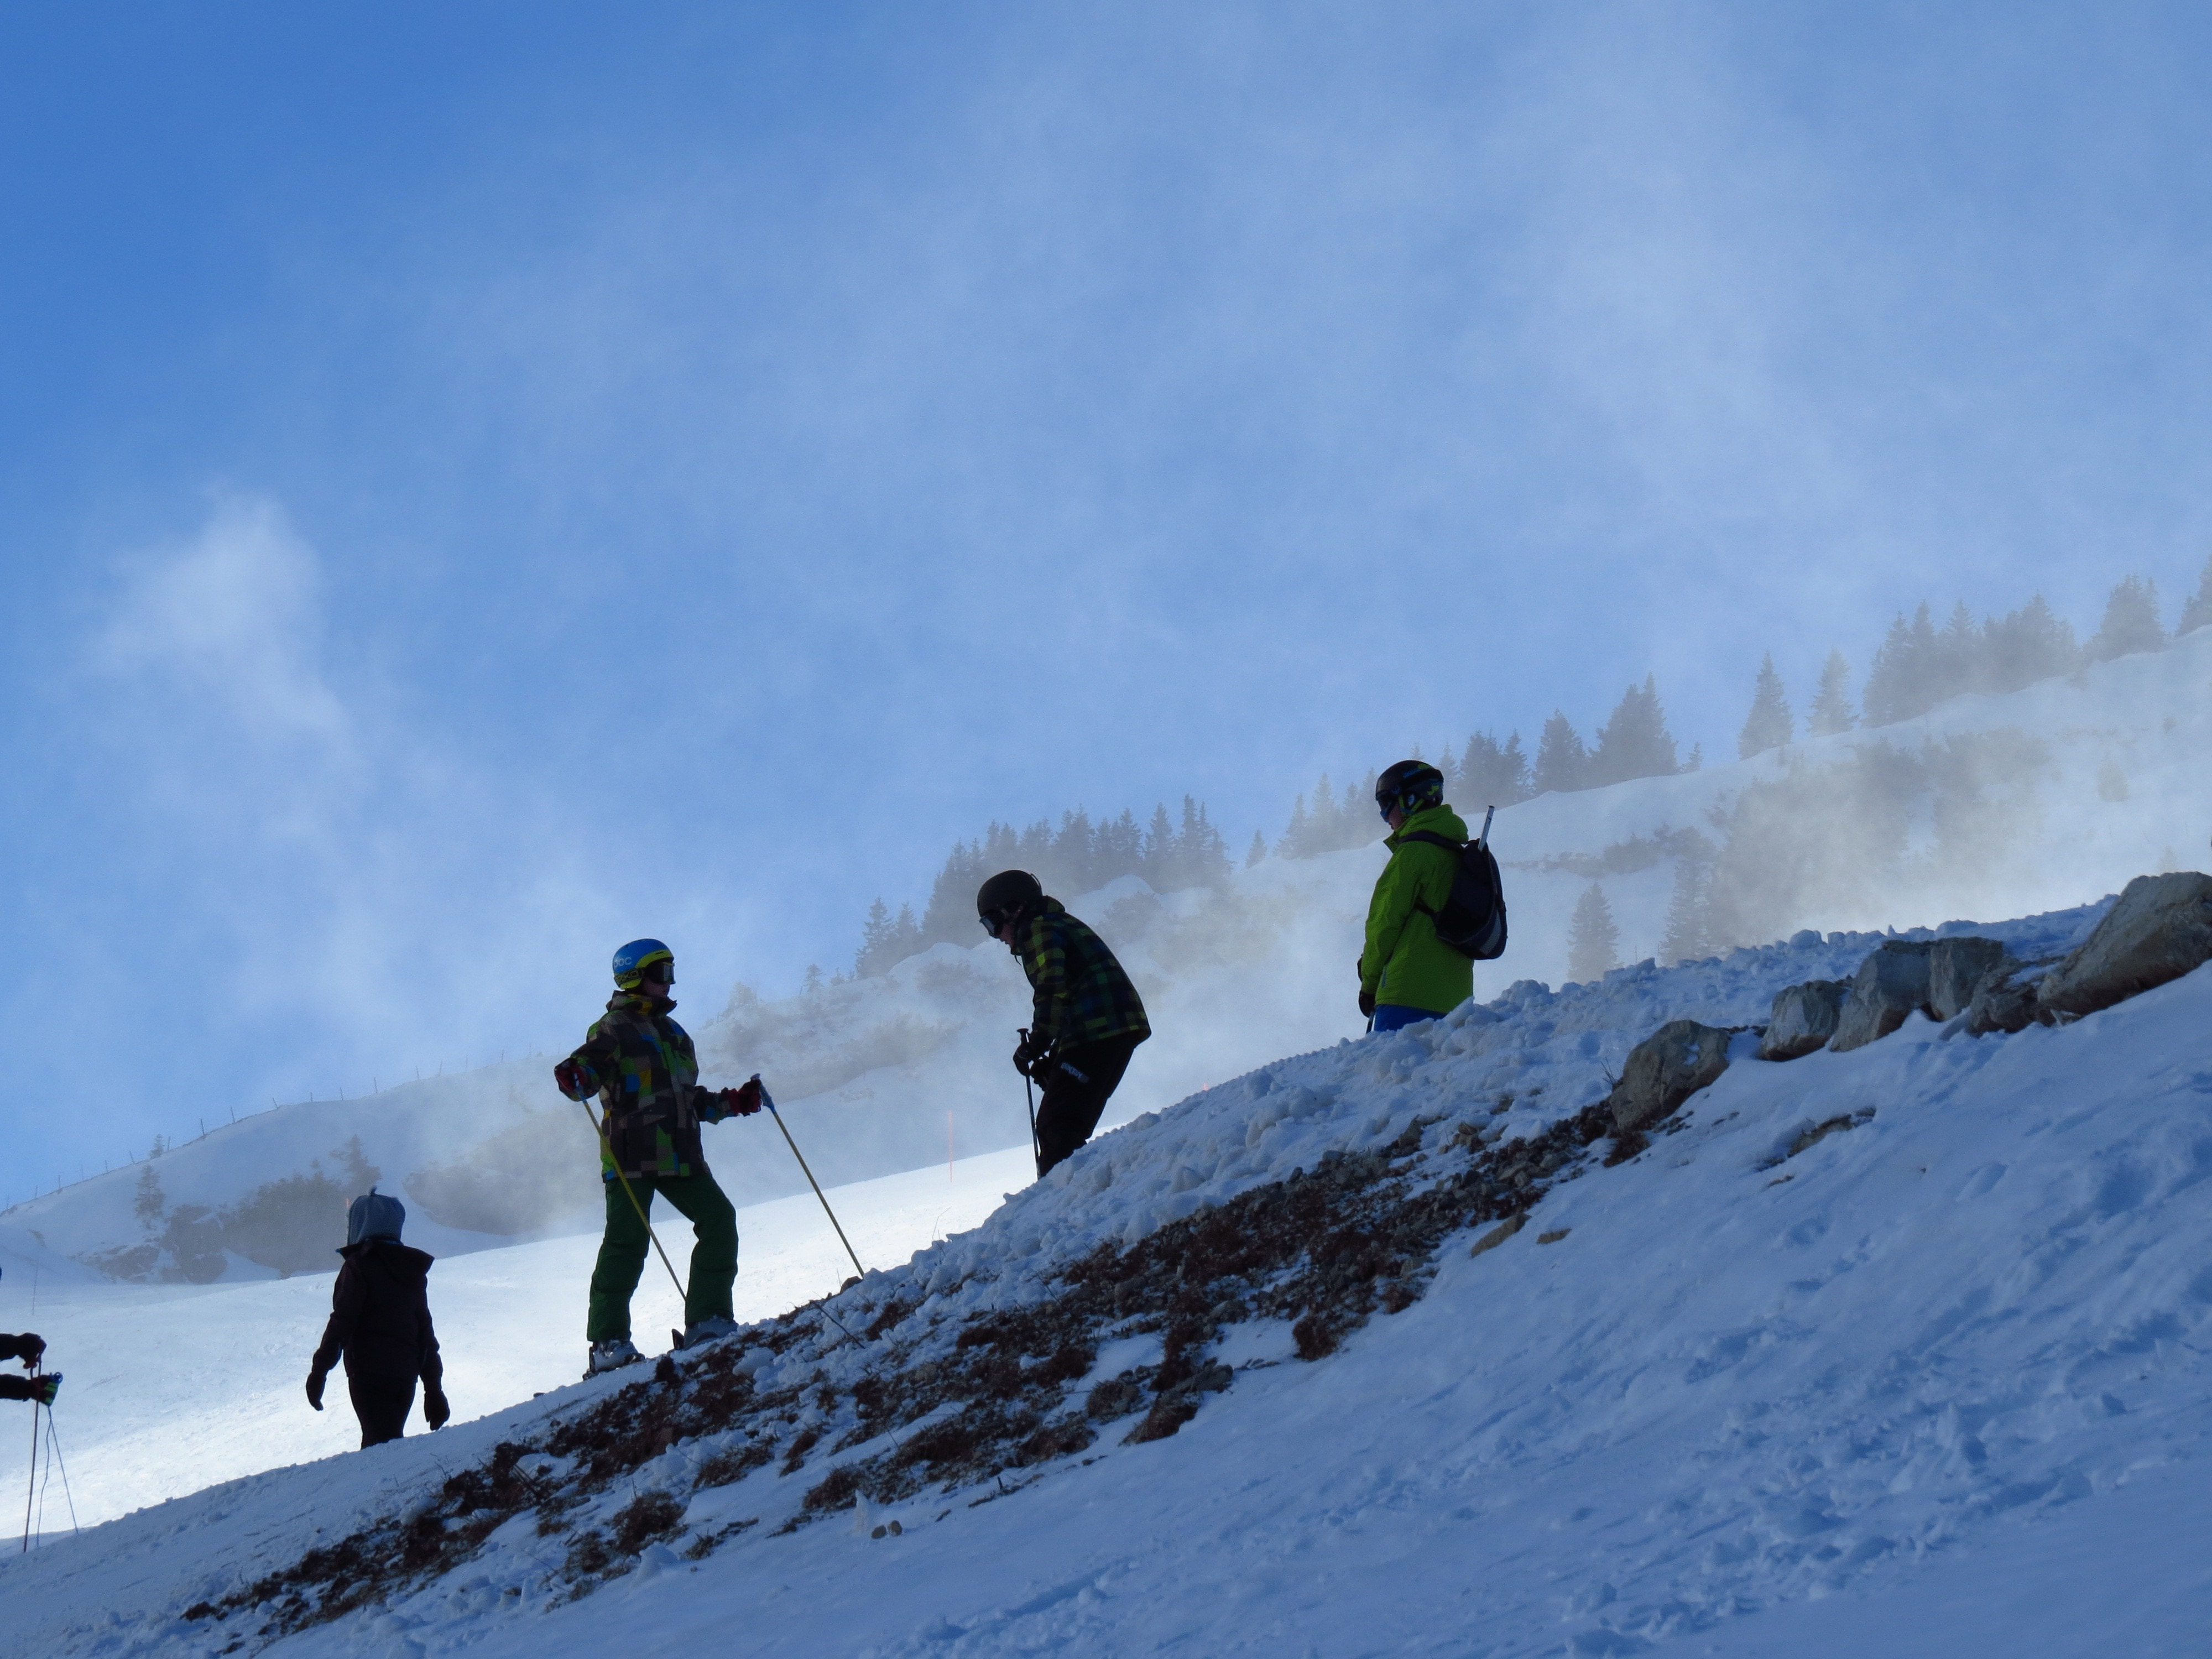 four persons skiing on snow capped mountain during day